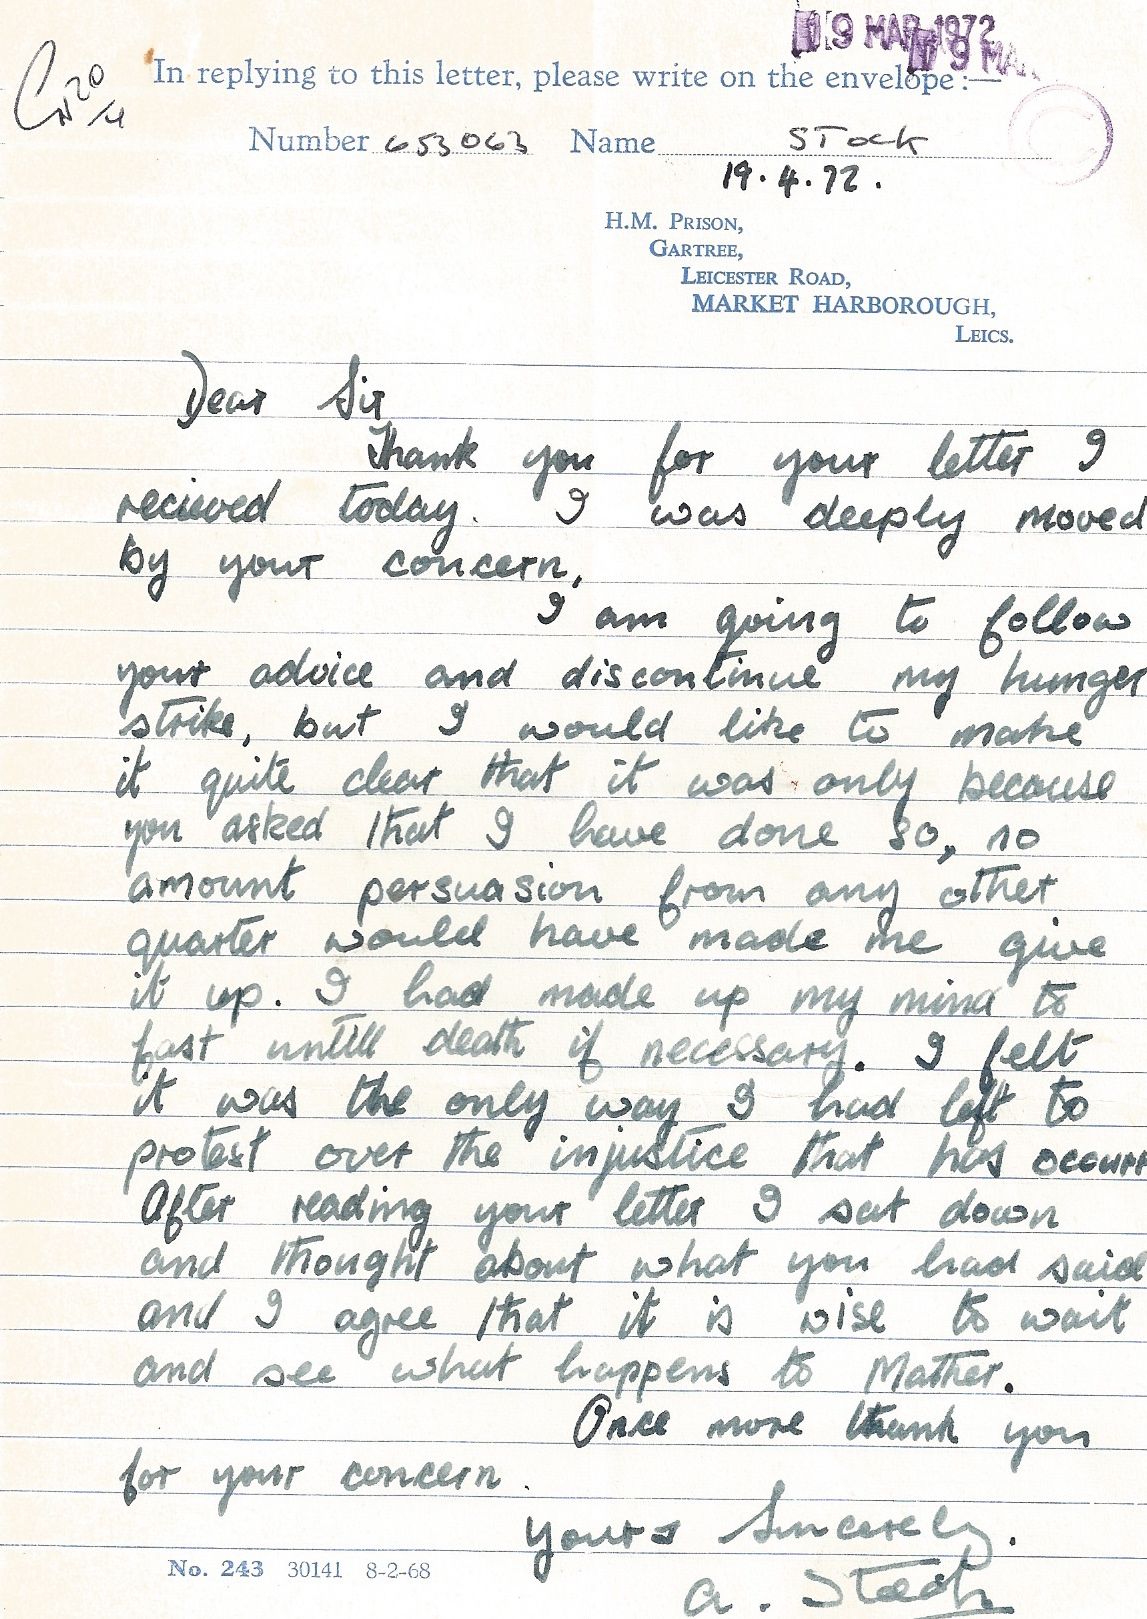 Tony Stock writes from HM Prison Gartree to Tom Sargant of JUSTICE, April 1972